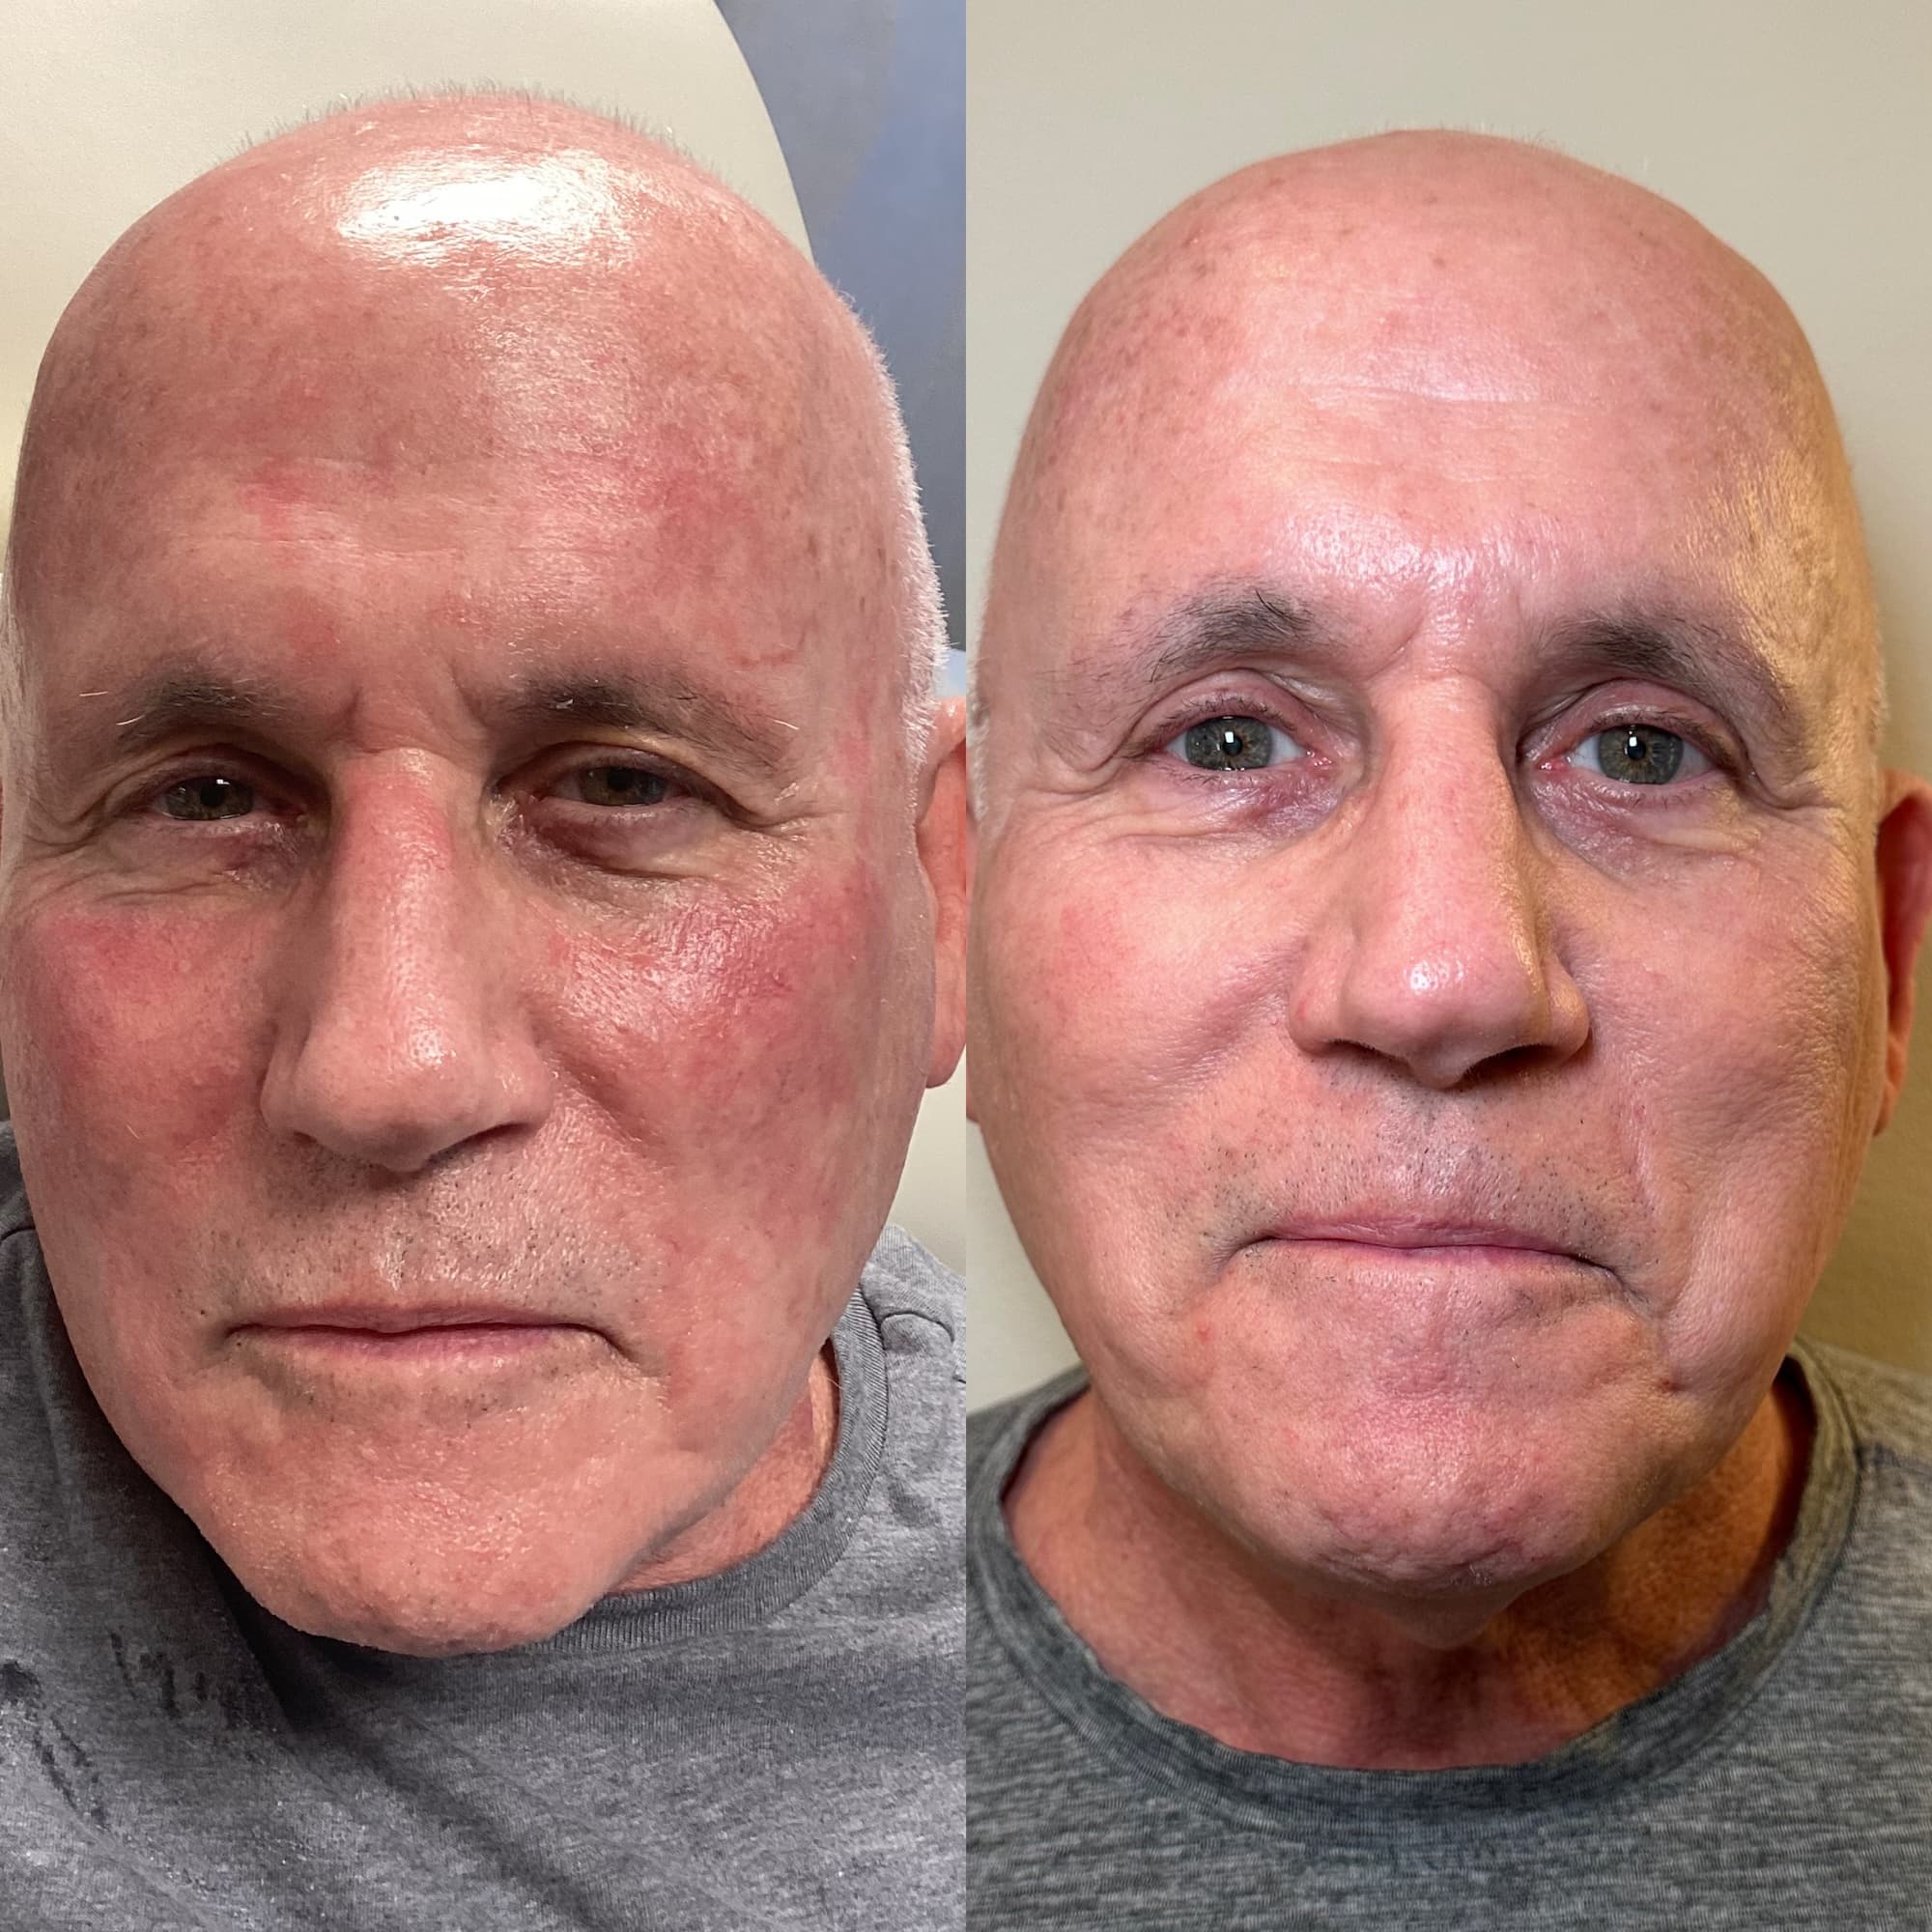 Man's face front view before and after showing results of BBL and HALO - removal of discolored red patches of skin